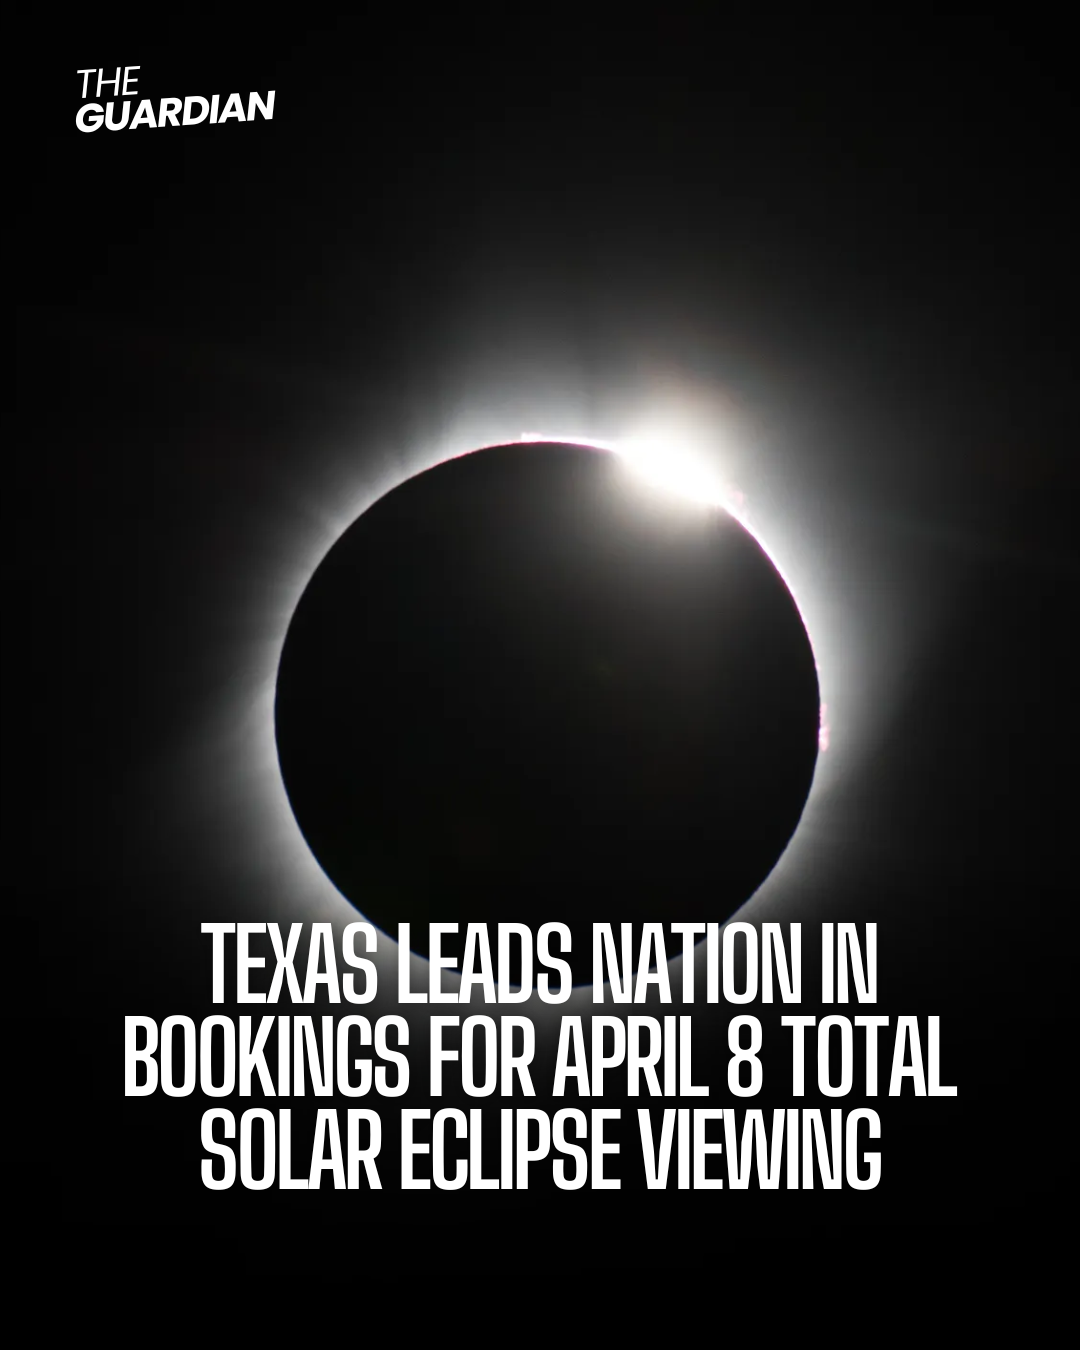 As solar eclipse approaches, Texas ranks as the most sought-after state in the country for viewing this celestial occurrence.